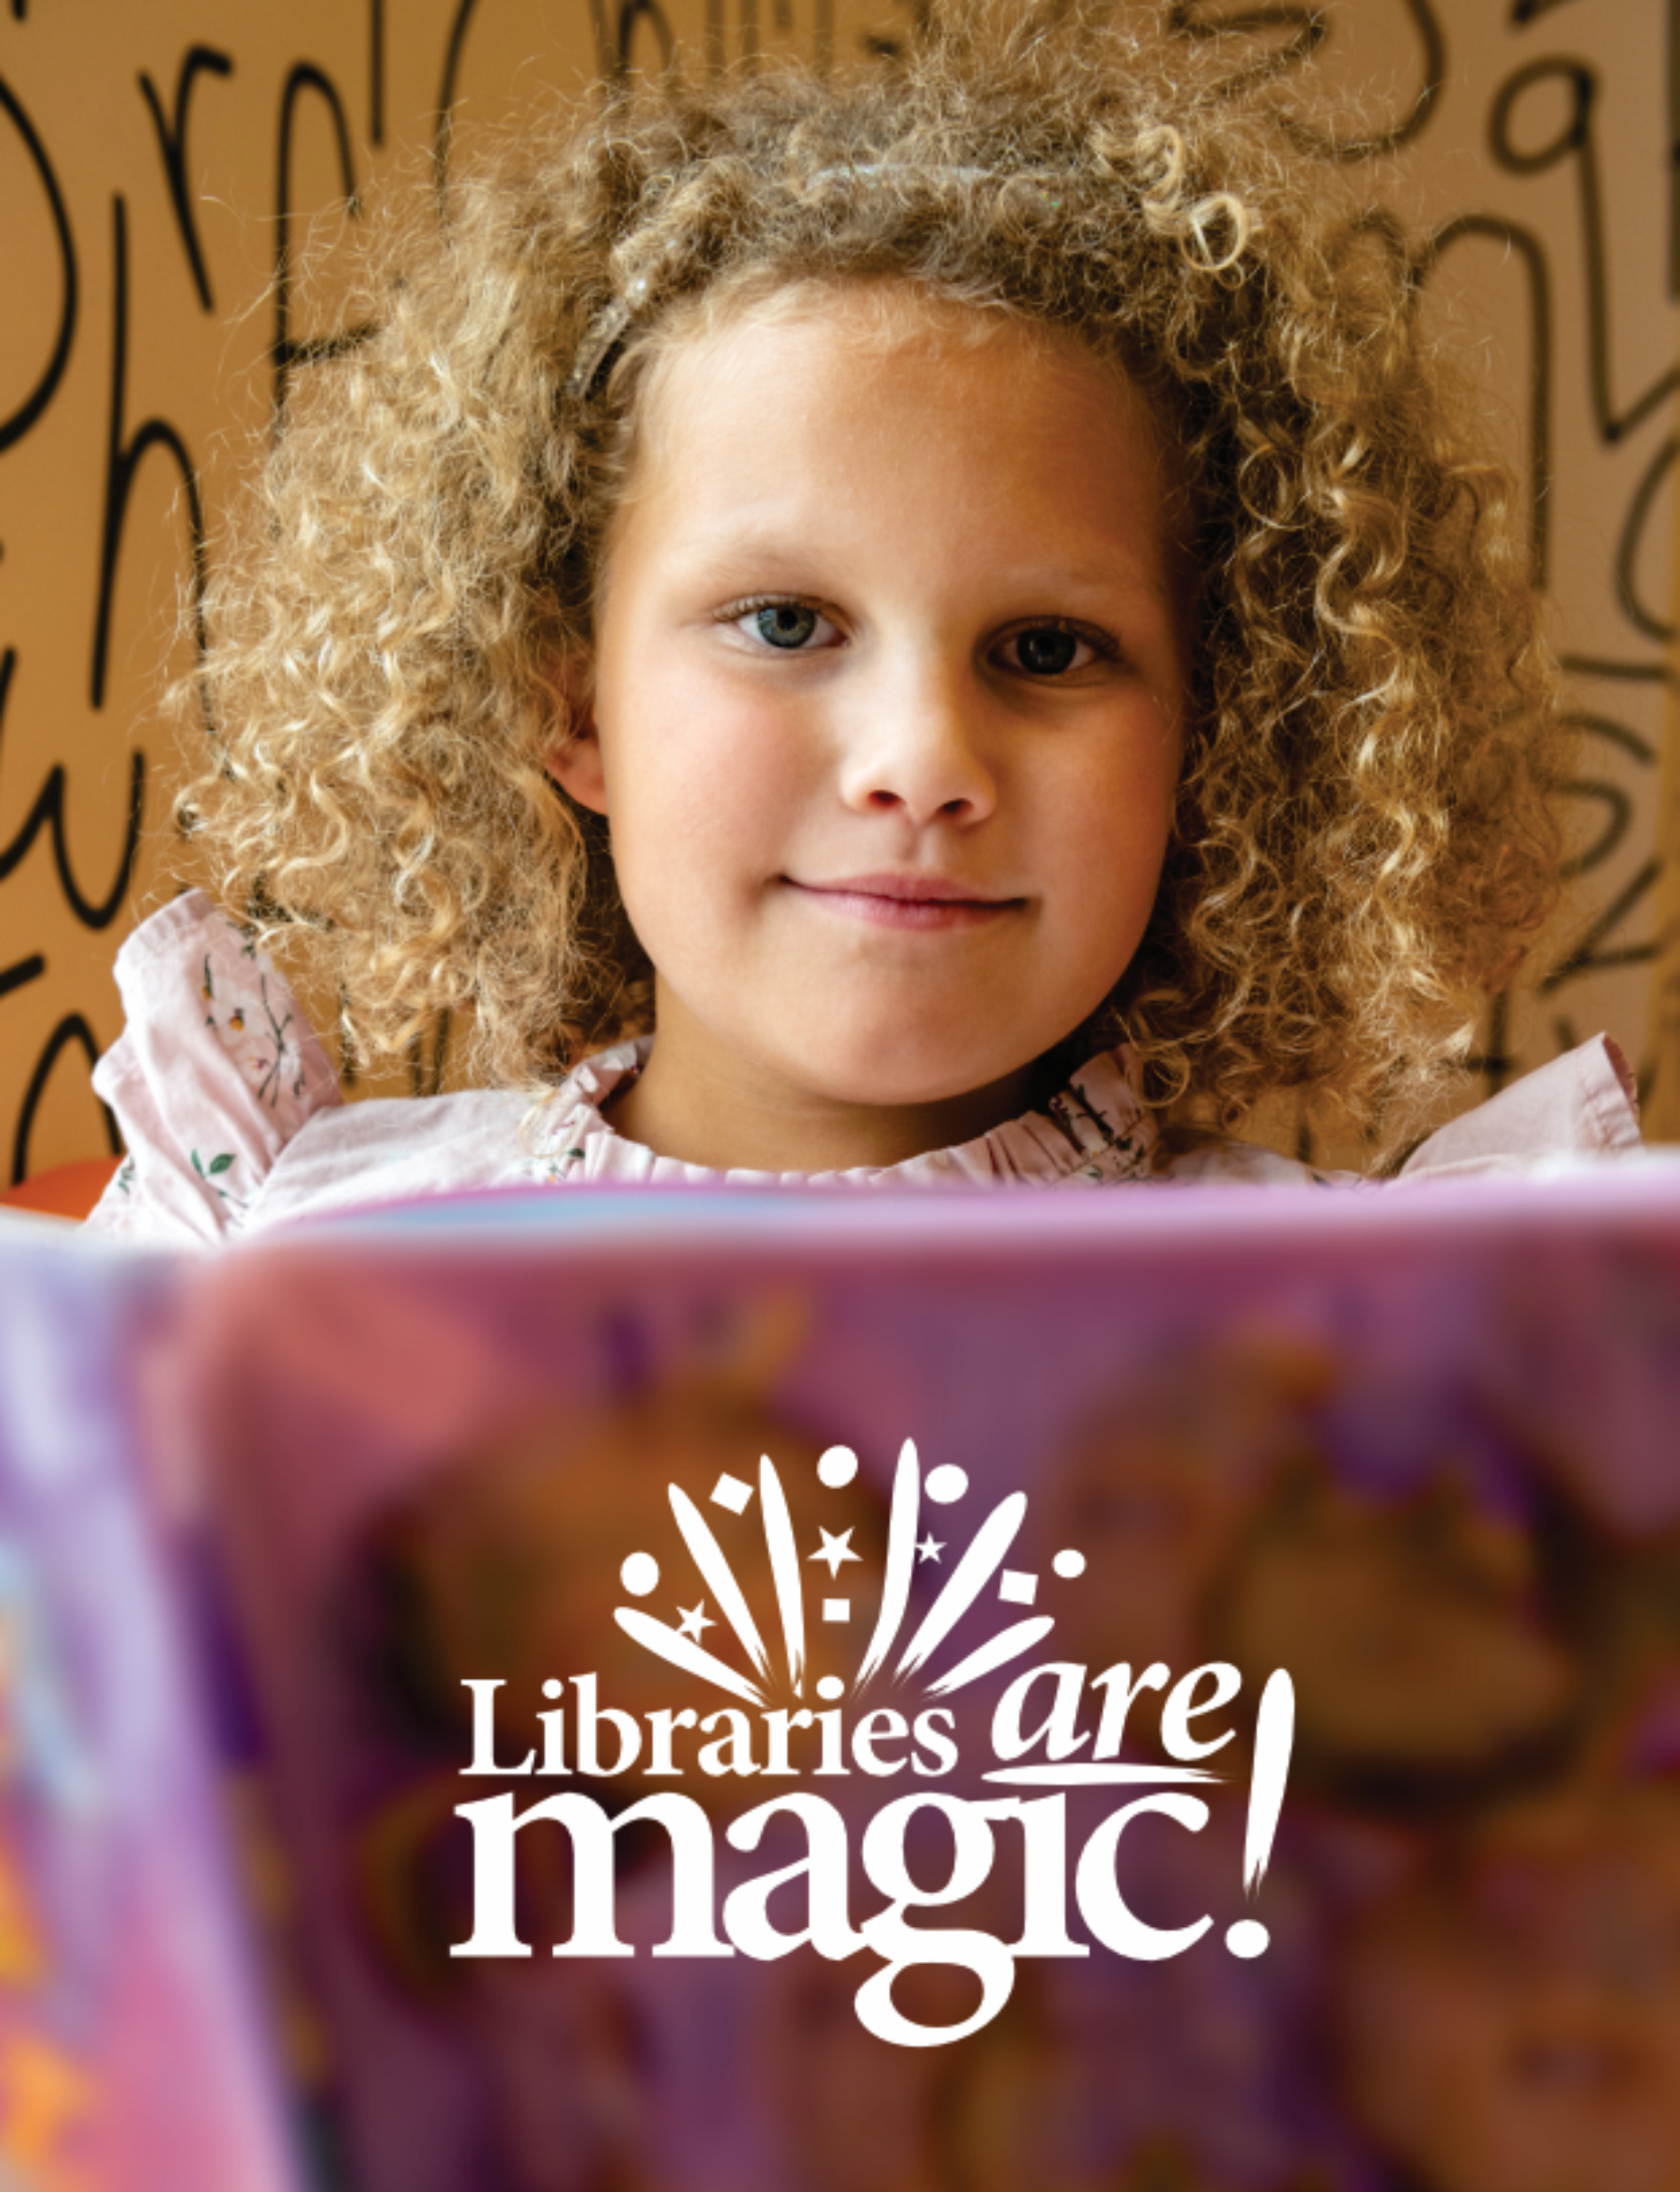 Giving Tuesday is November 28. Libraries are magic!